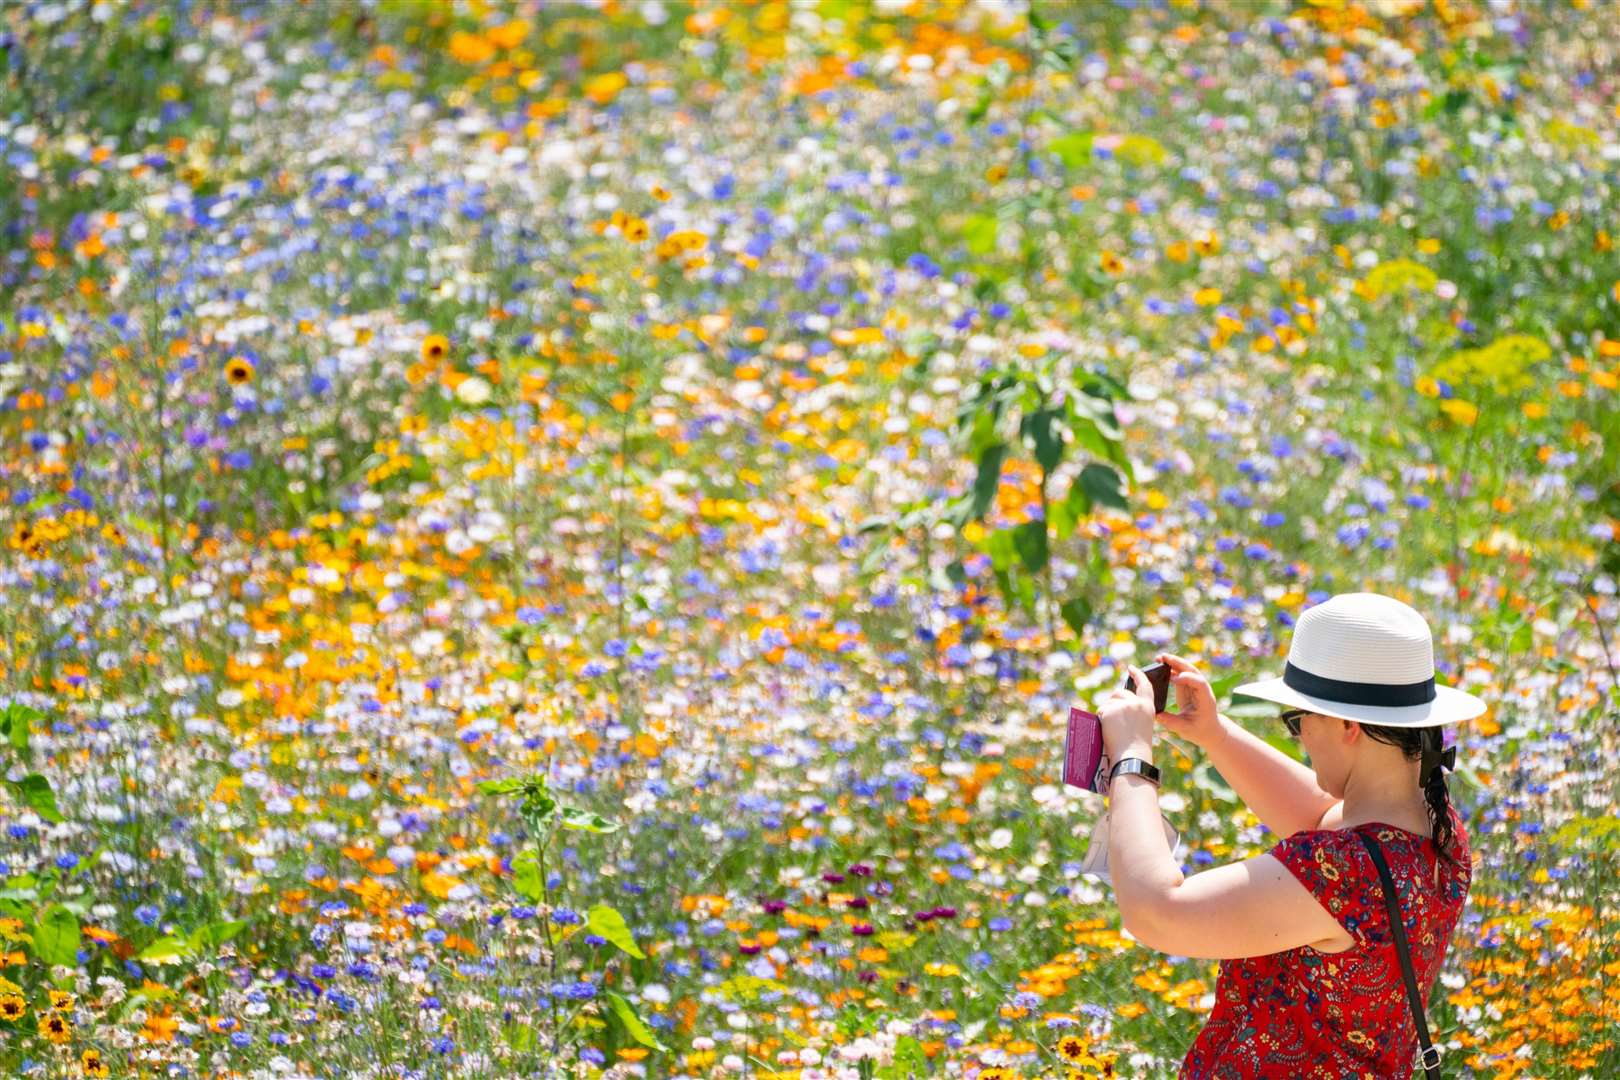 A woman takes a photo of the ‘SuperBloom’ wild flower garden at the Tower of London, in central London (Dominic Lipinski/PA)